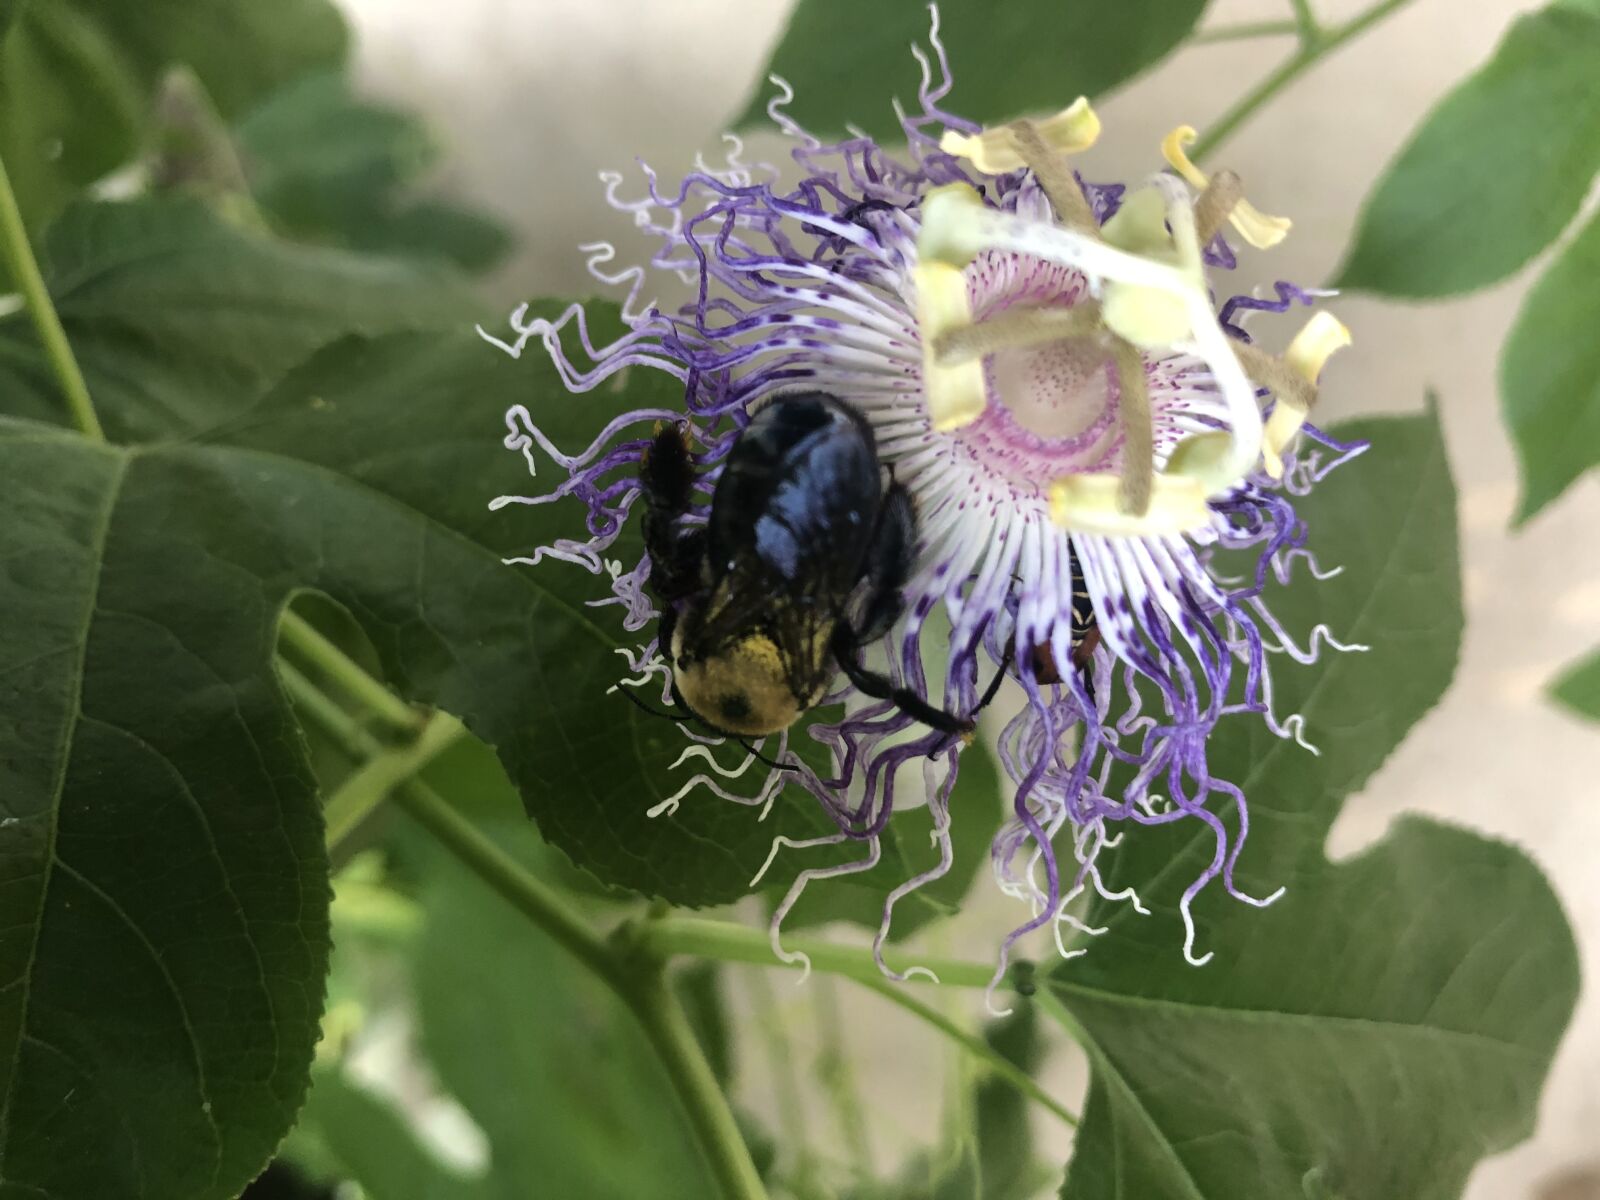 Apple iPhone X + iPhone X back dual camera 4mm f/1.8 sample photo. Passion flower, insect, nature photography